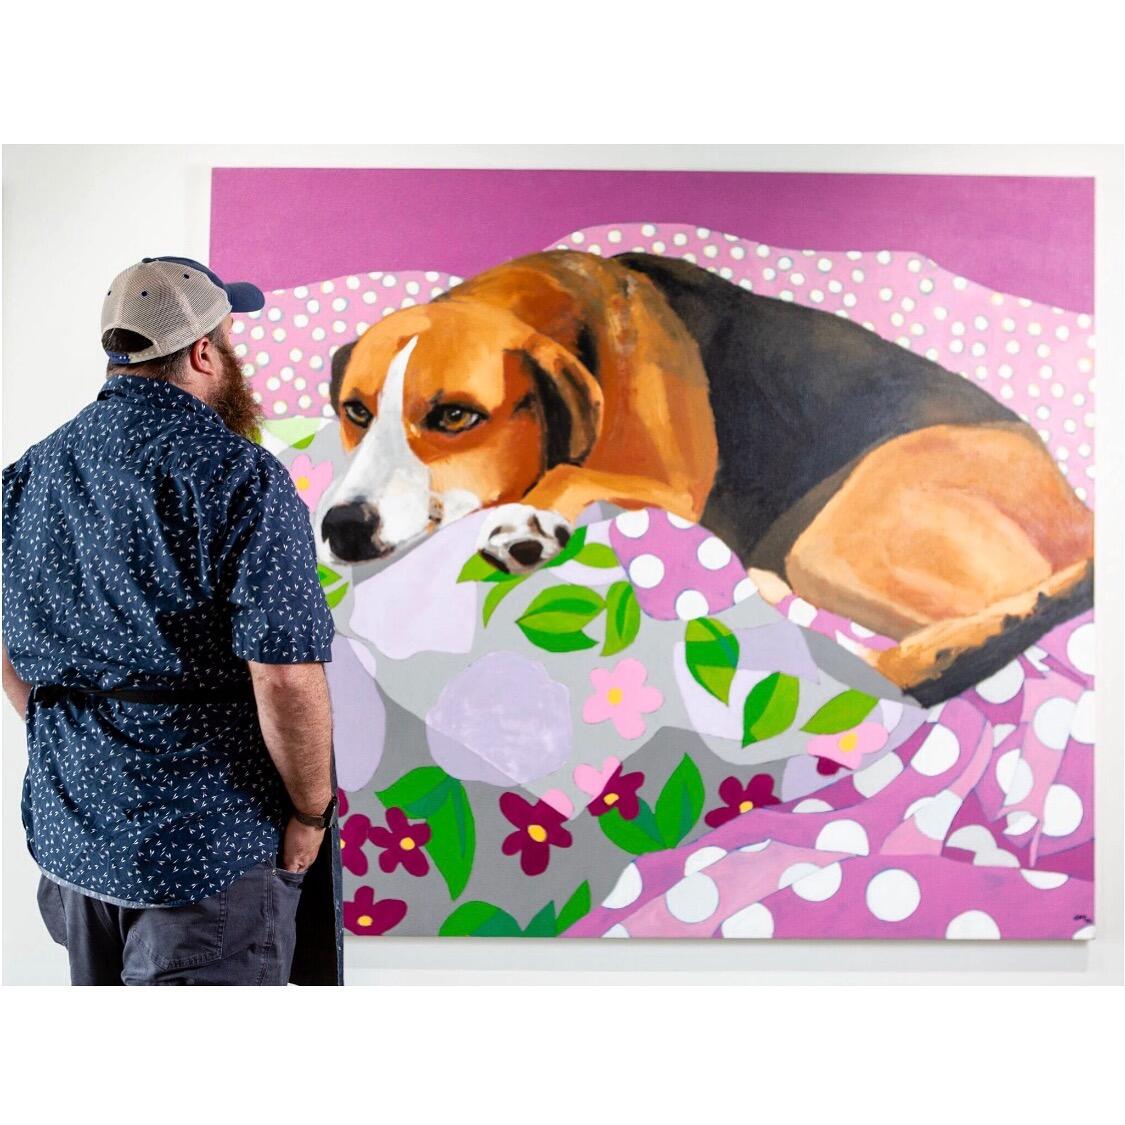 Painter Jay McClellan proves it really is a dog's life